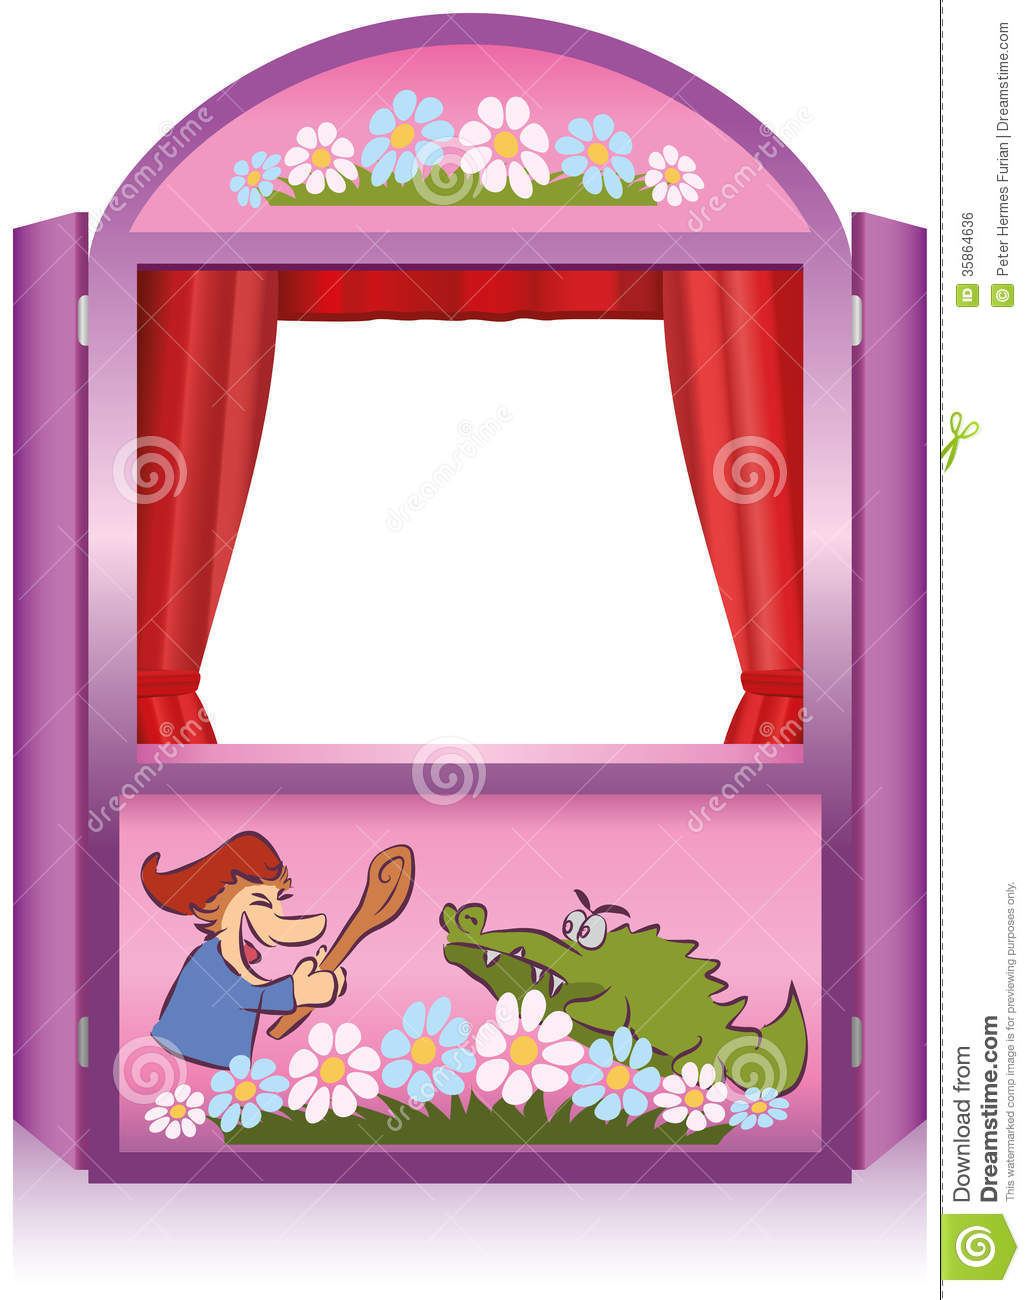 Punch And Judy Booth Royalty Free Stock Image.